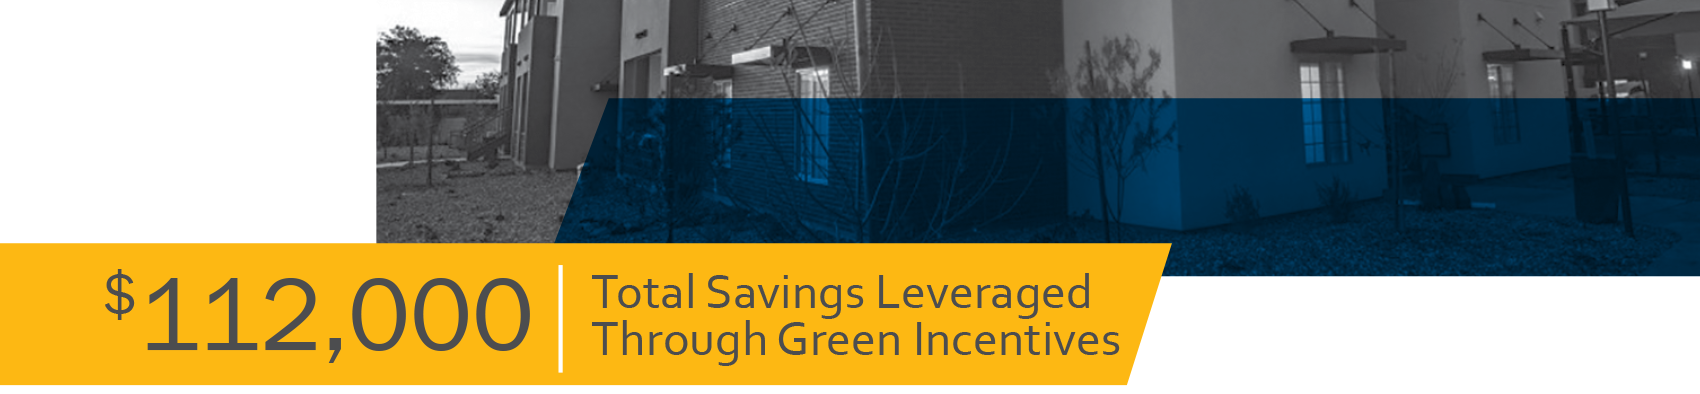 $112,000 Total Savings Leveraged Through Green Incentives